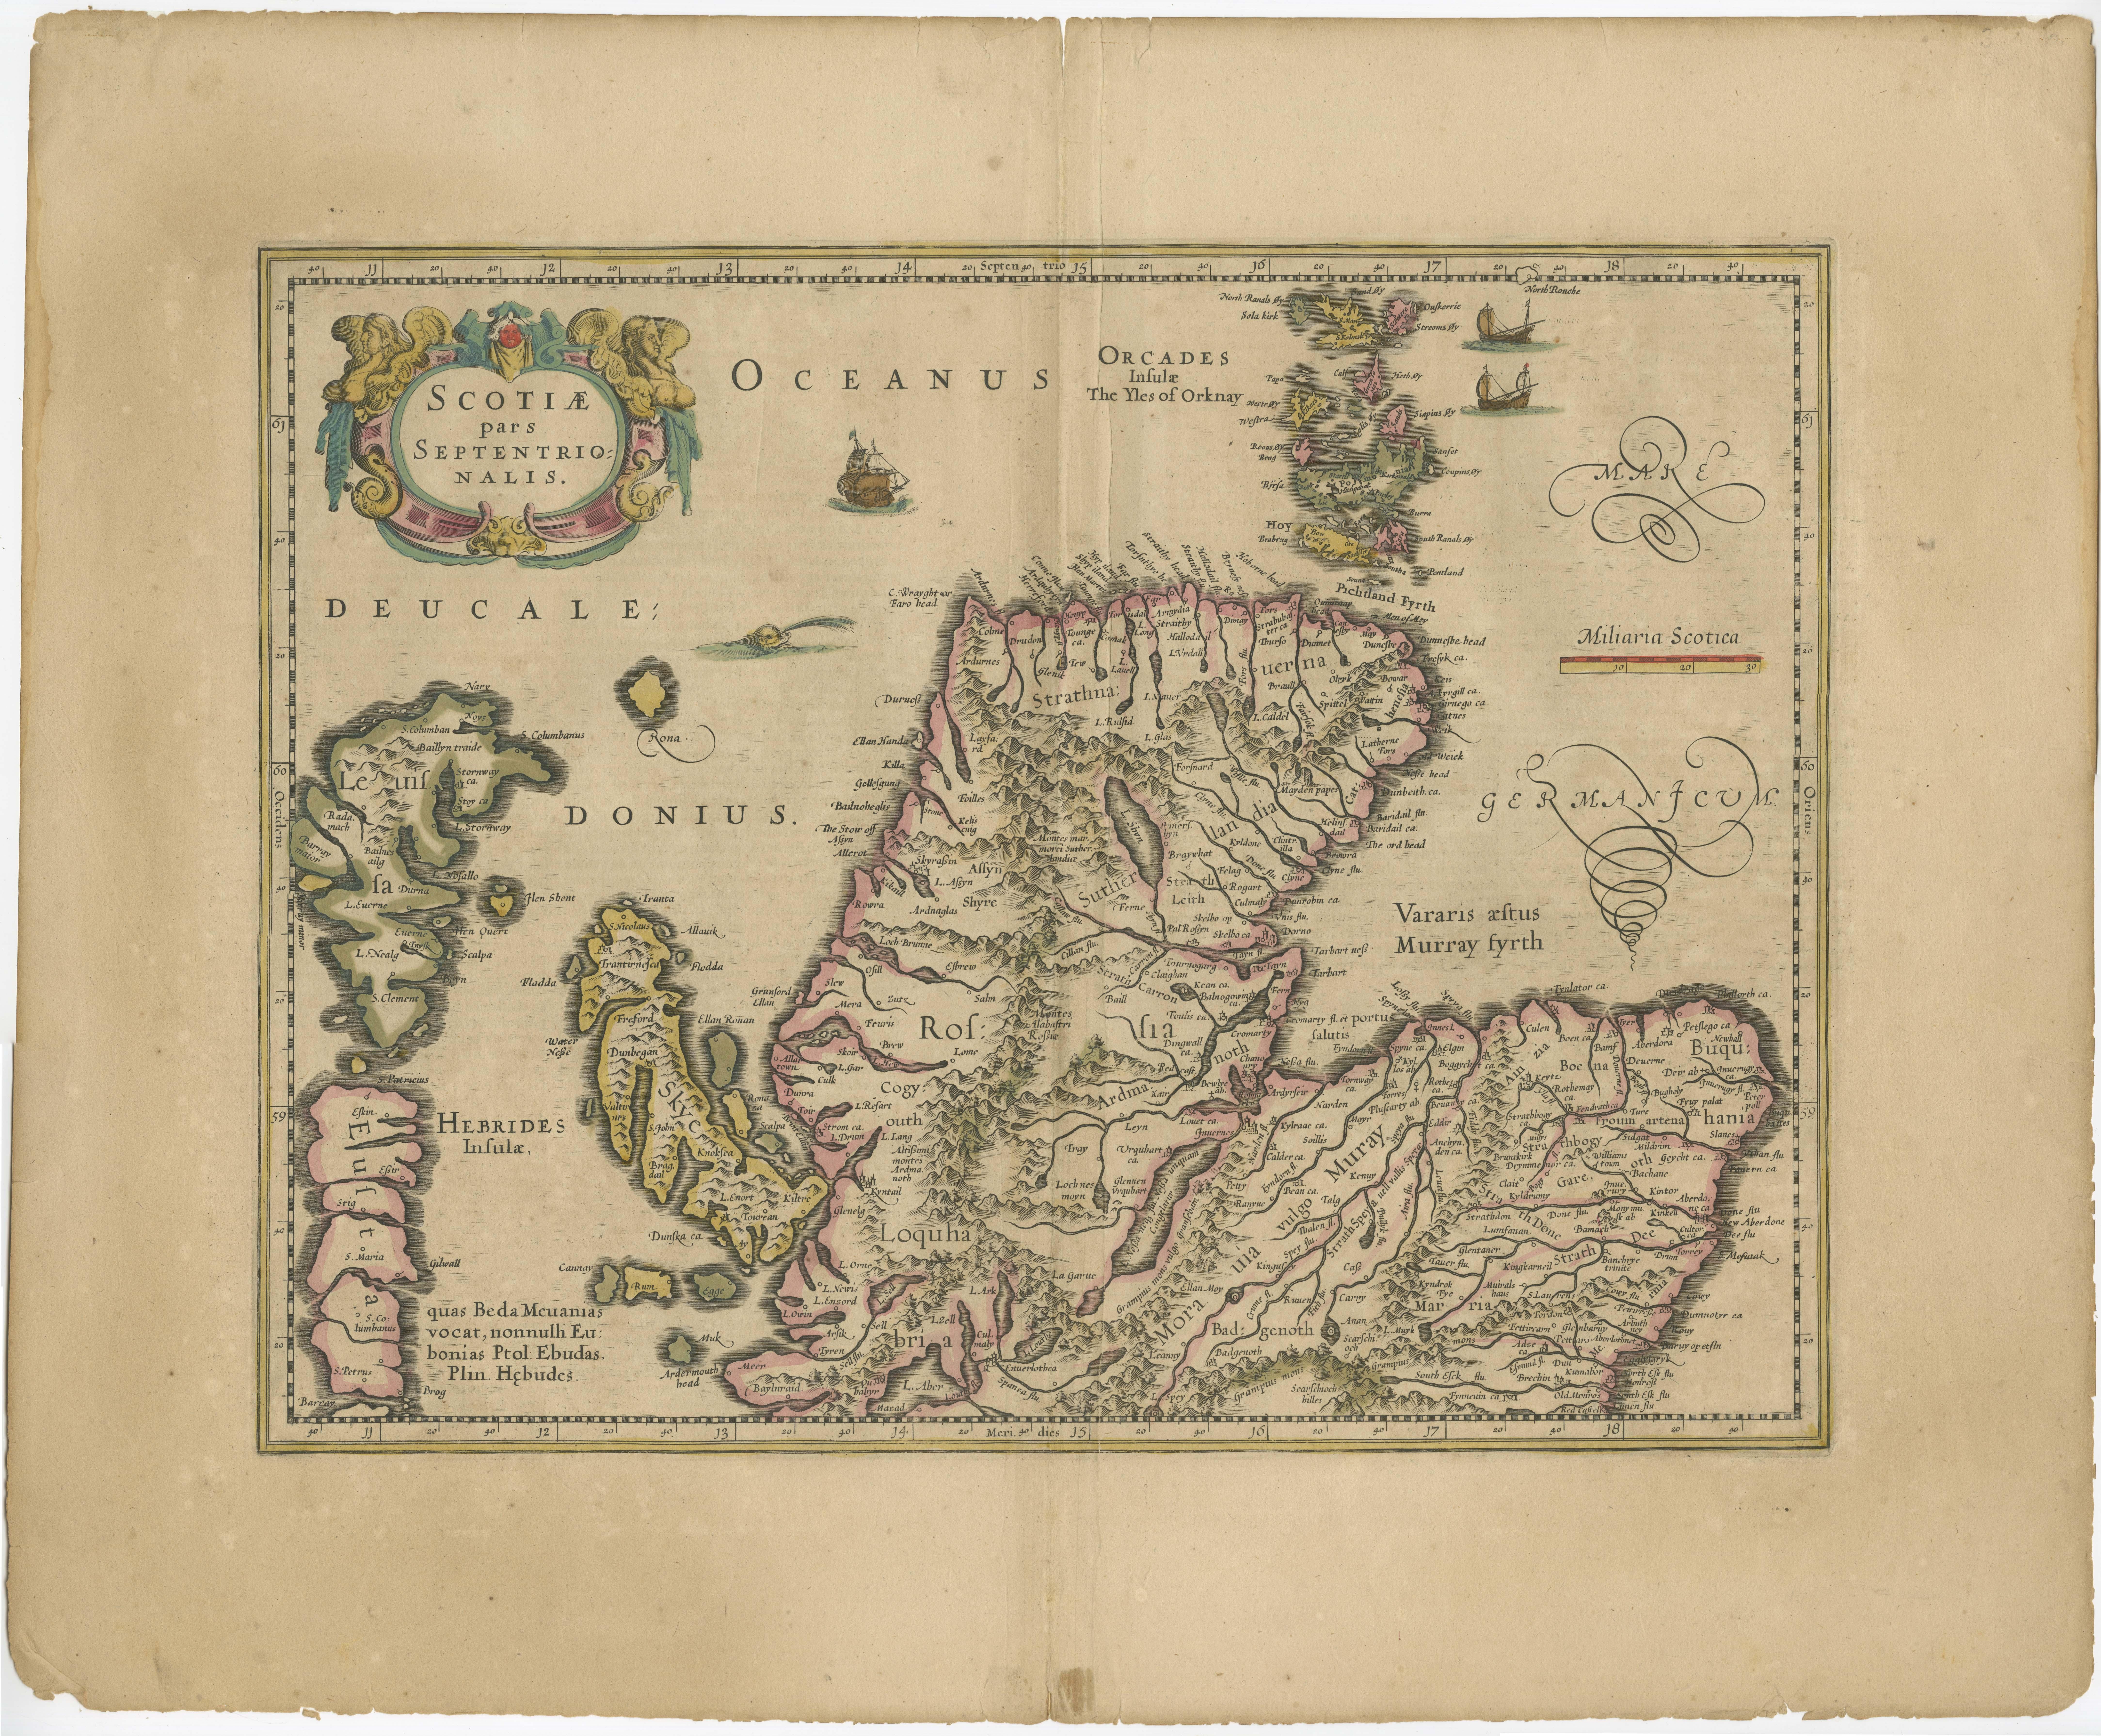 The antique map, titled 'Scotiae pars septentrionalis,' depicts the northern part of Scotland. Crafted by Hondius around 1640, this map is a historical treasure showcasing the geographical details of that period. Alongside the cartographic elements,